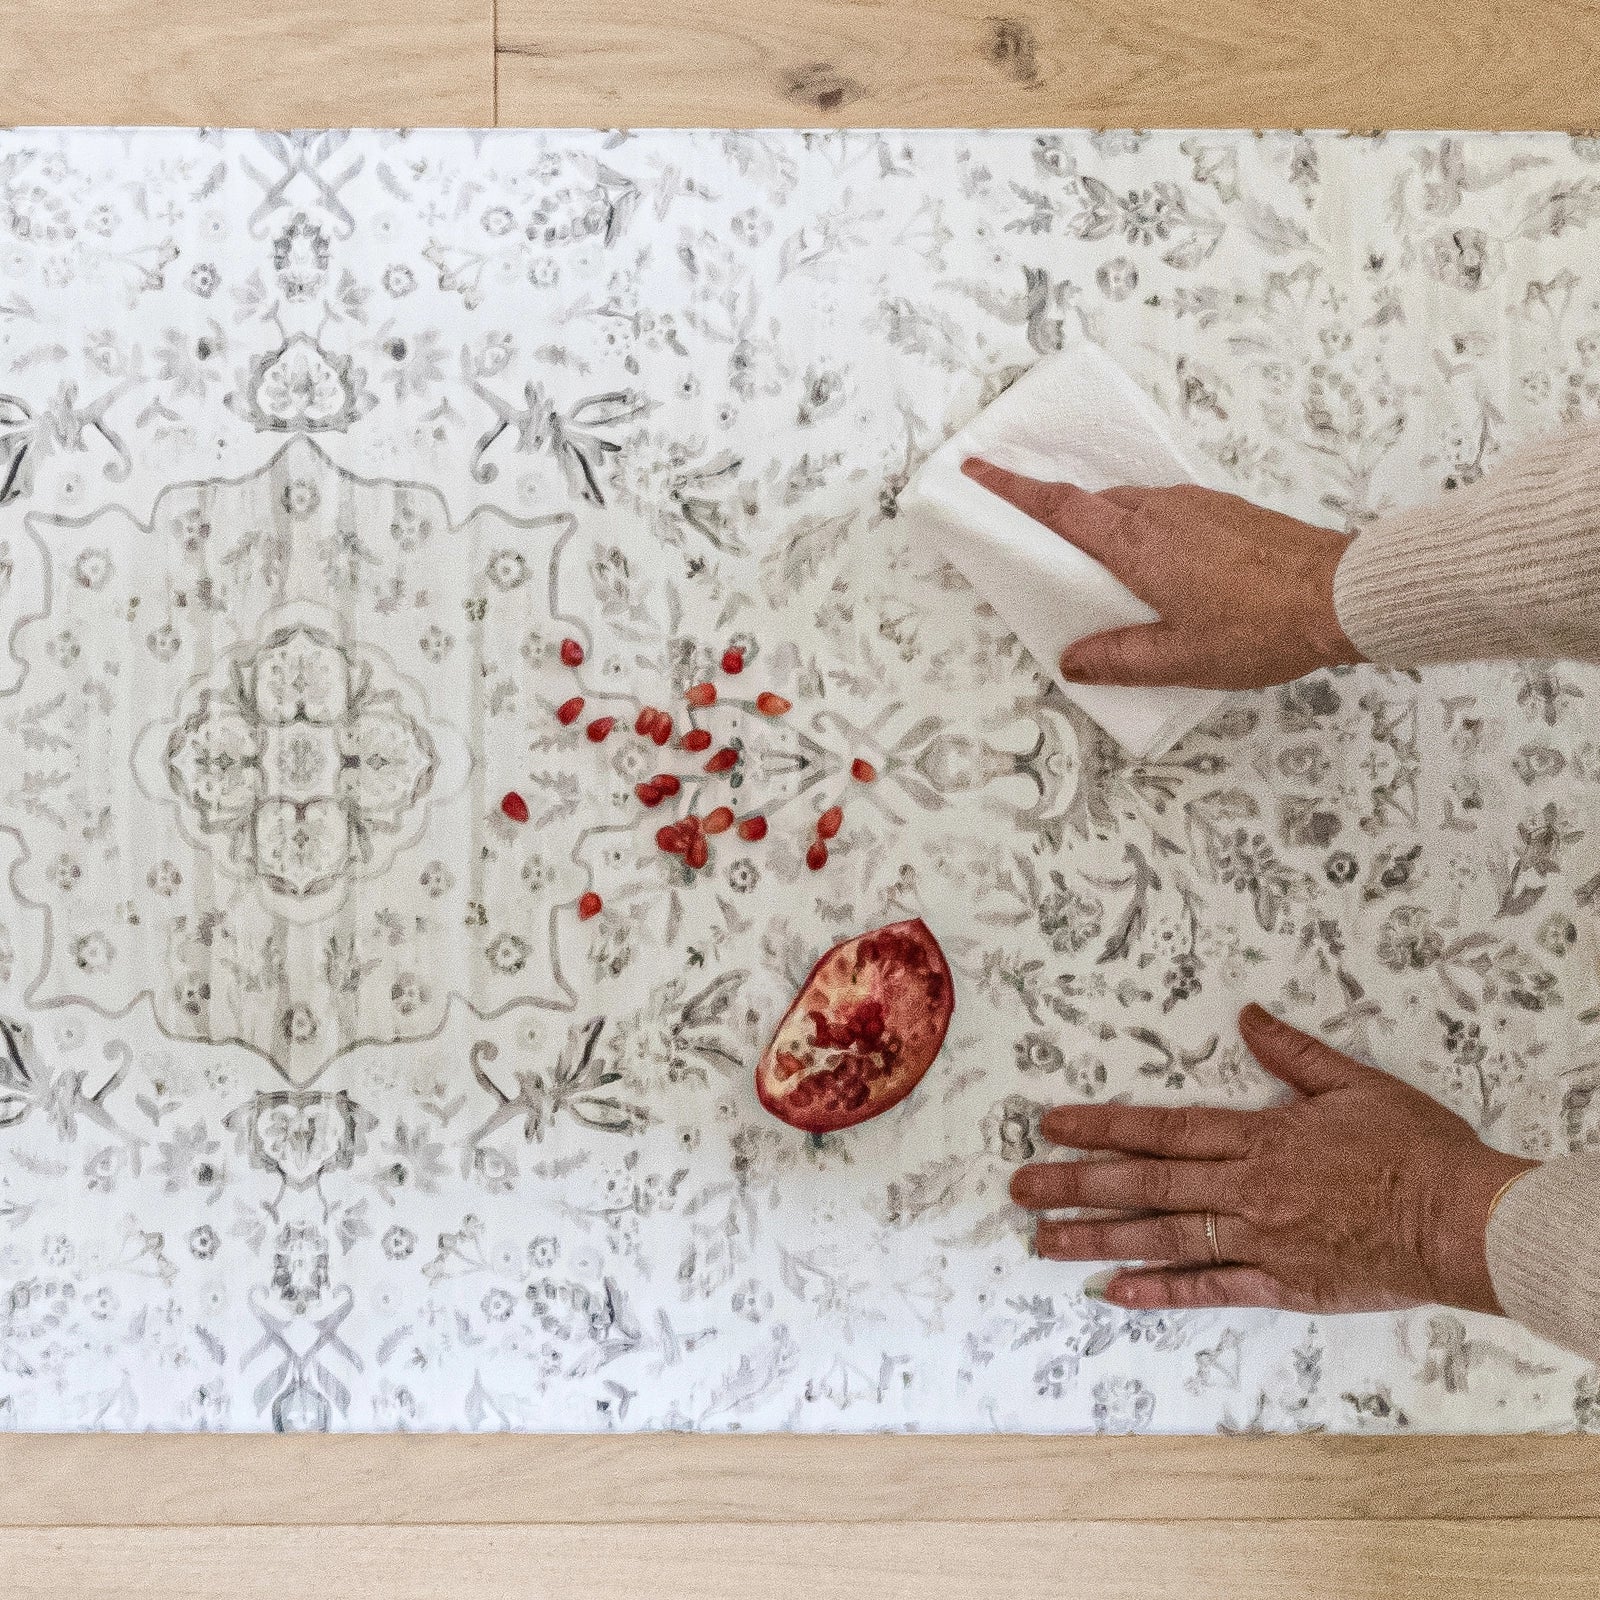 Emile latte beige and gray floral boho kitchen mat shown shown with woman's hand wiping up spilled pomegranate